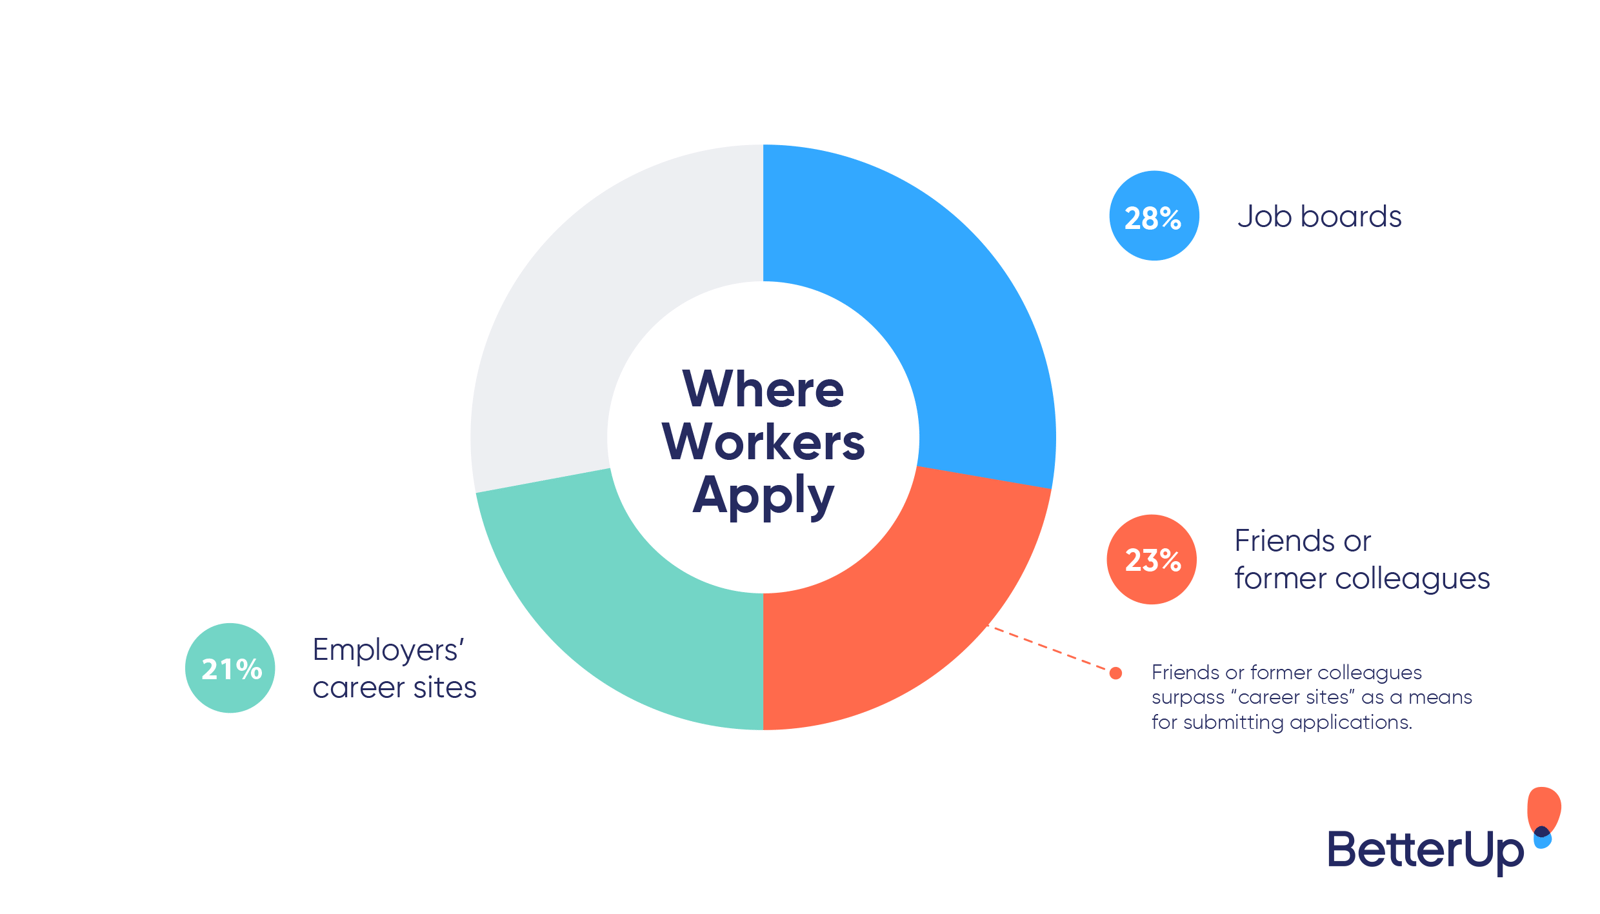 Where Workers Apply